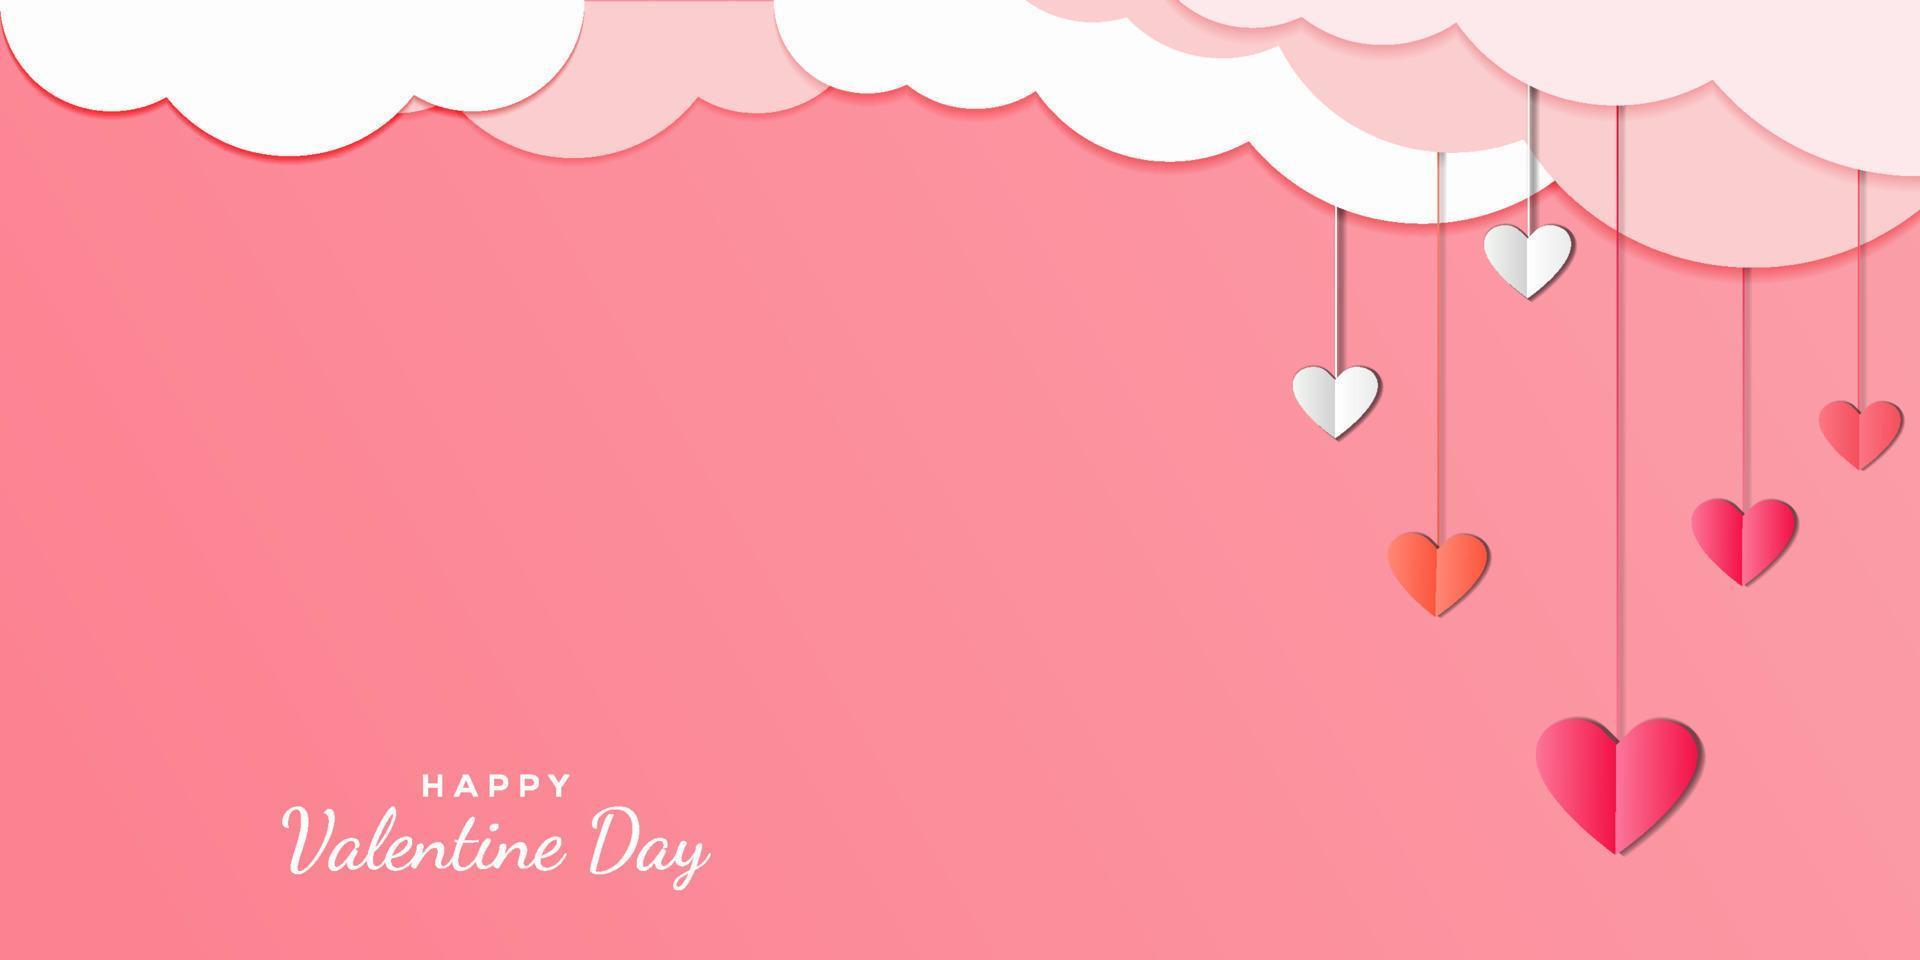 valentine background in paper cut style design with hanging hearts and copy space. vector design